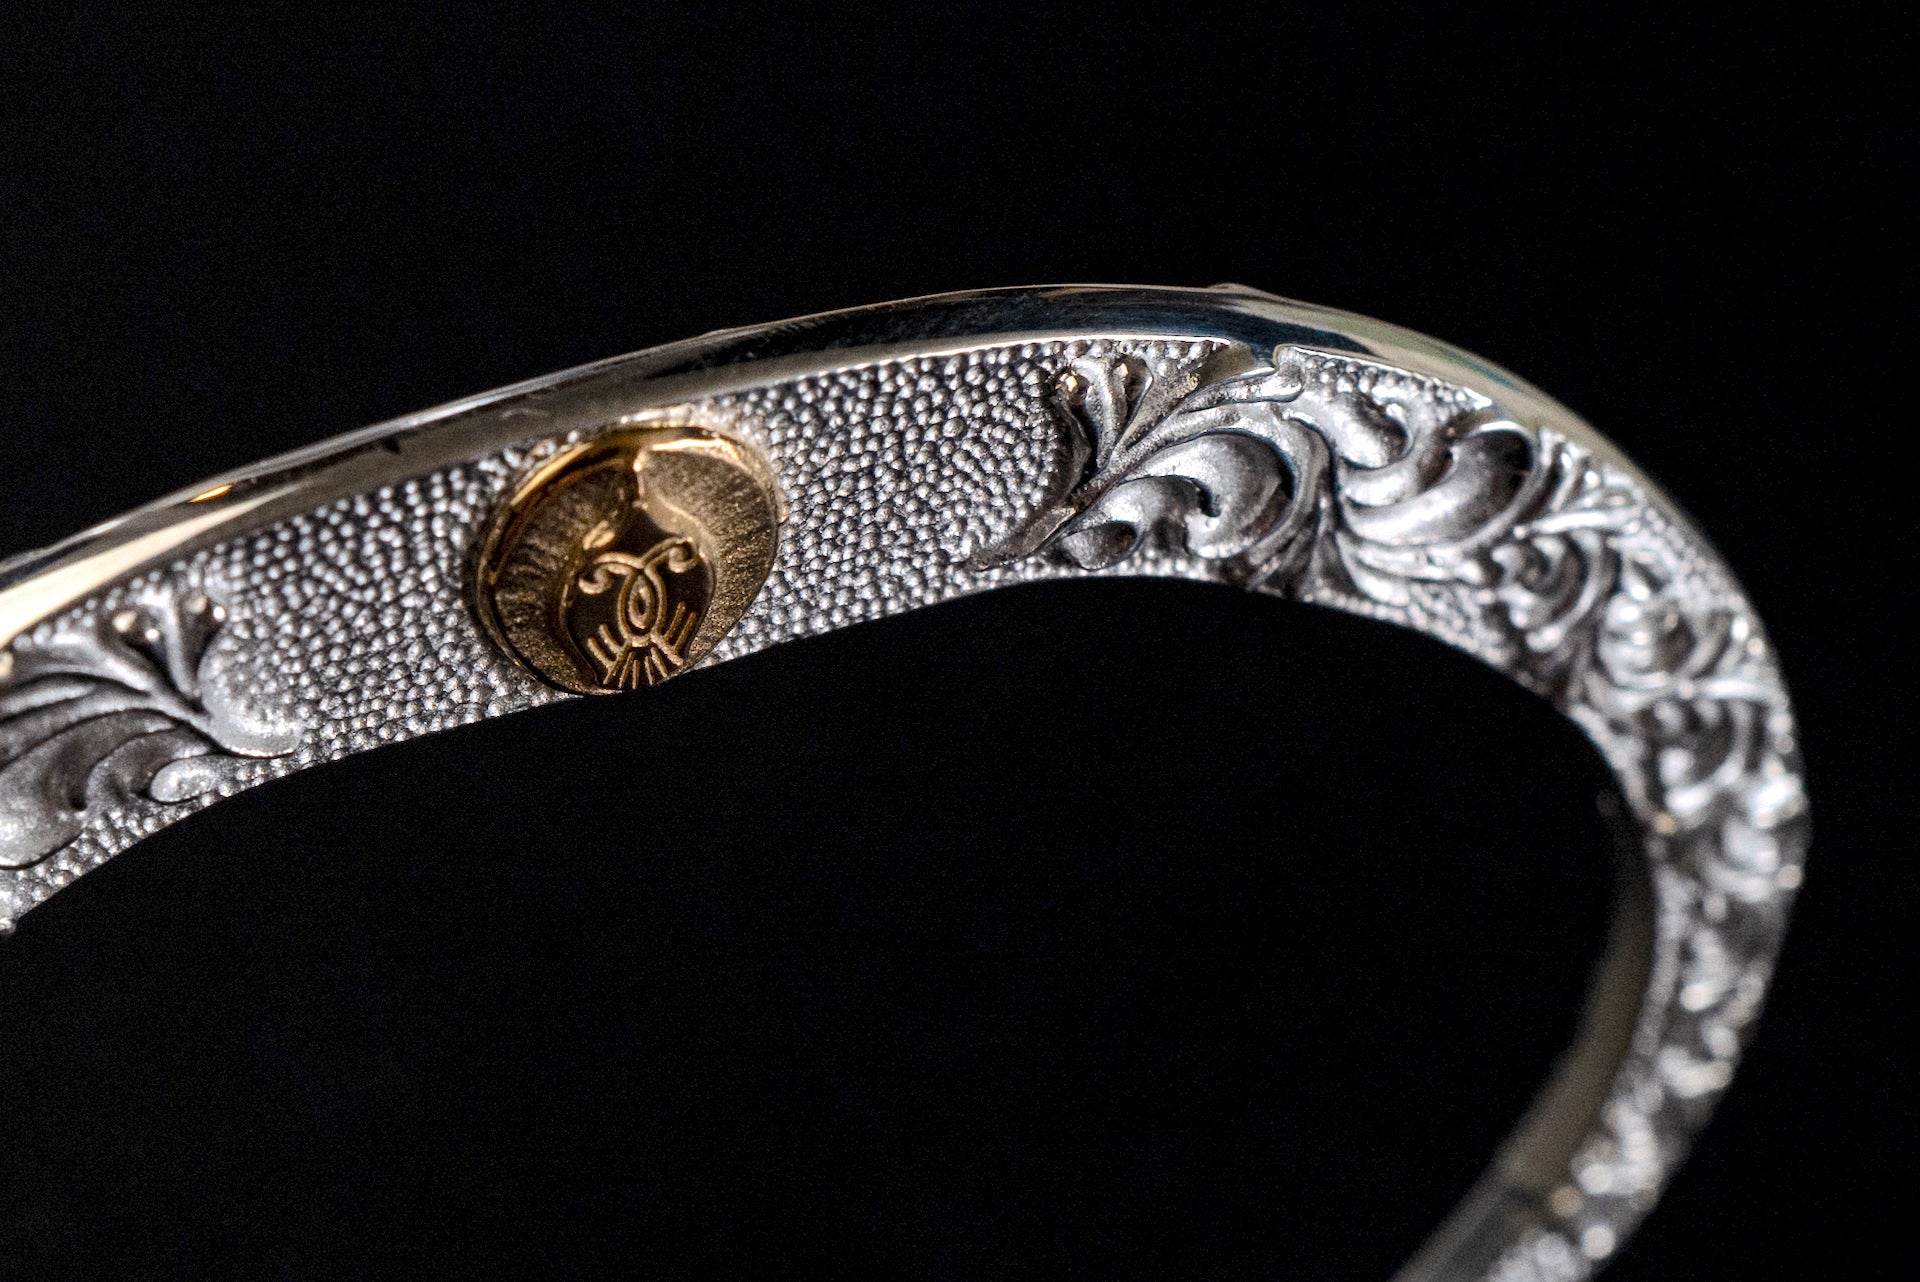 Legend 8mm "Double-Face" Silver Bangle with 22K Gold Emblem (B-113)